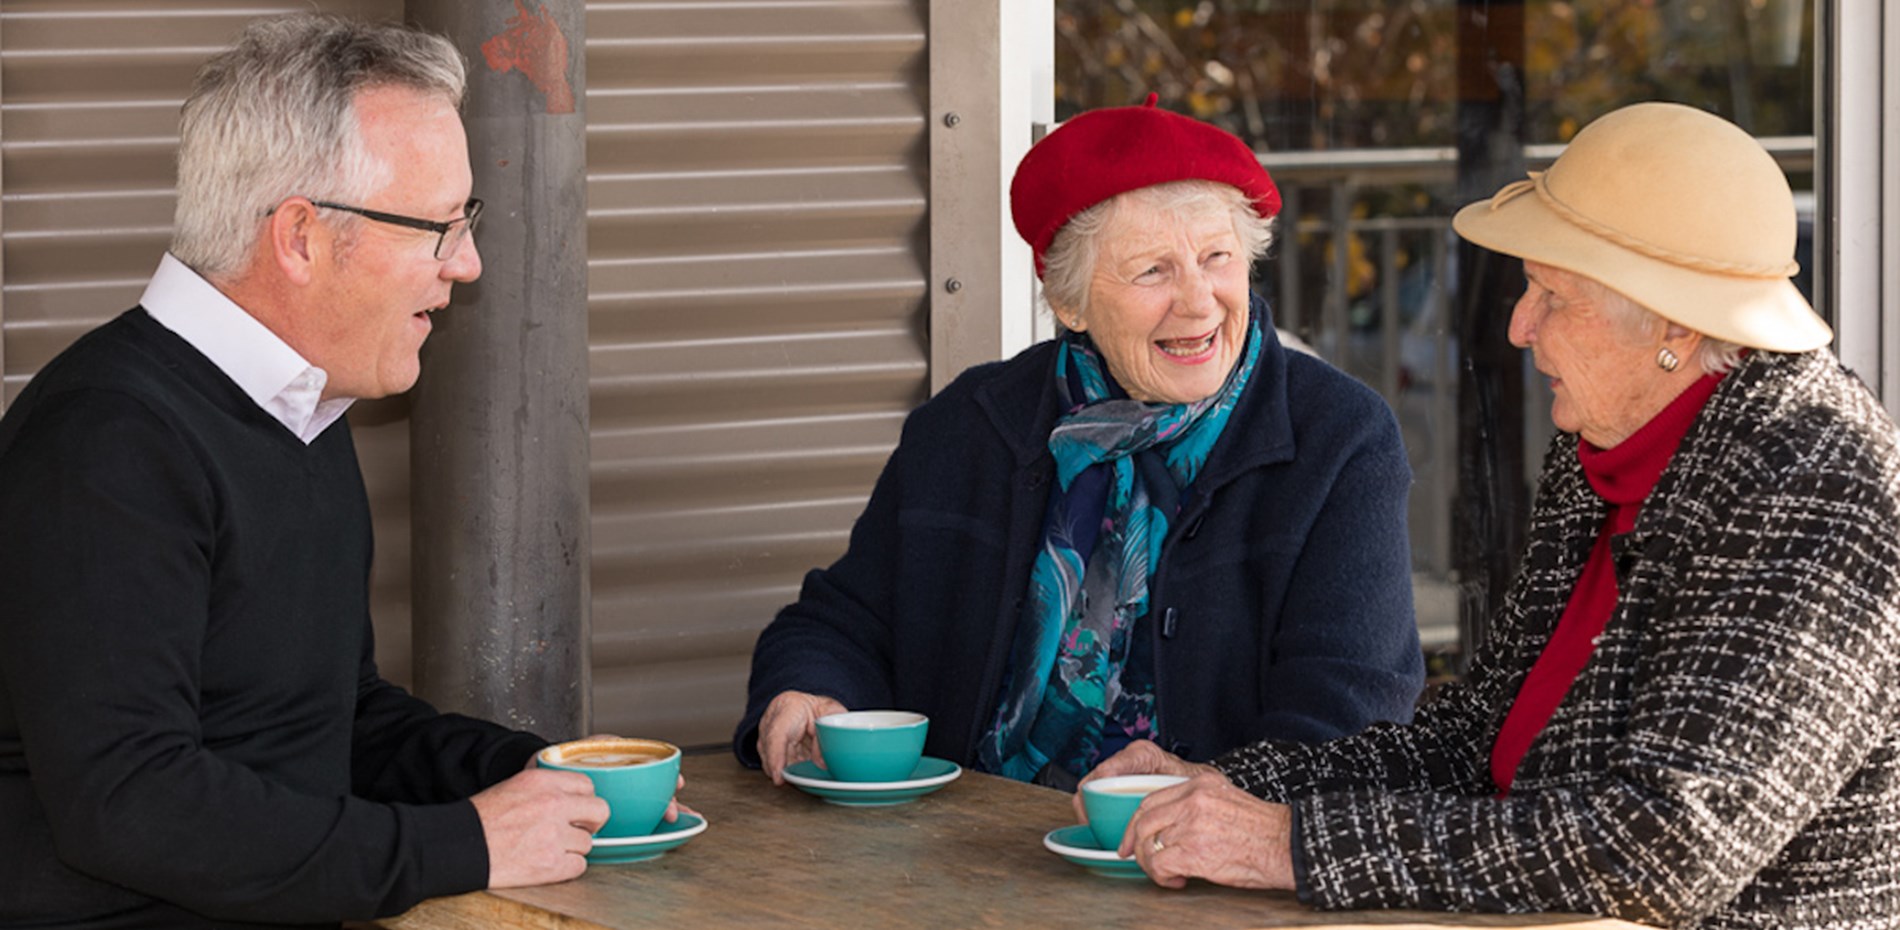 SCOTT MORRISON MUST ENSURE AGED CARE ACROSS THE COUNTRY IS READY FOR COVID OUTBREAKS Main Image